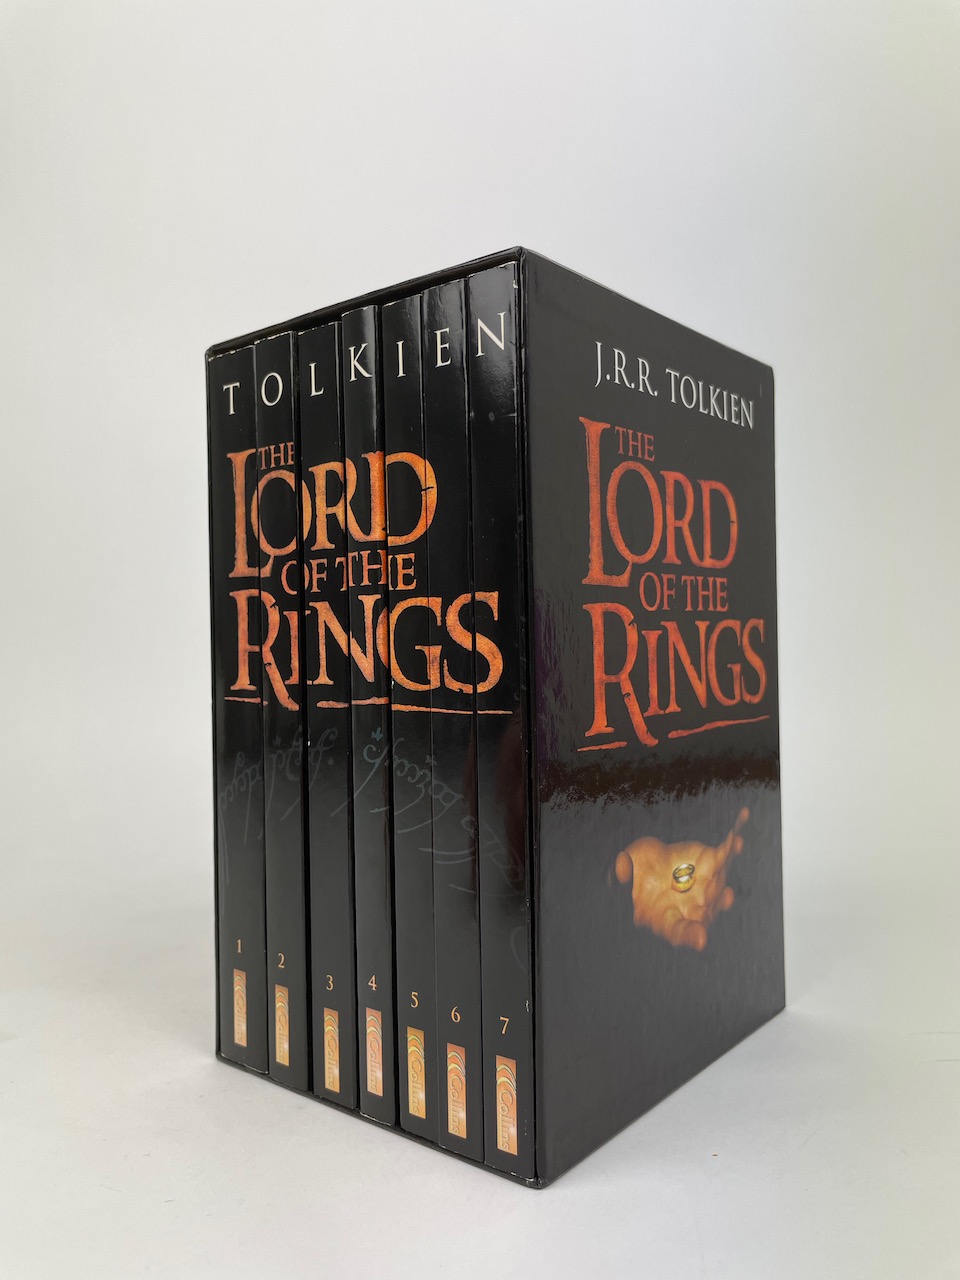 The Lord of The Rings 2001 Film Edition by HarperCollins